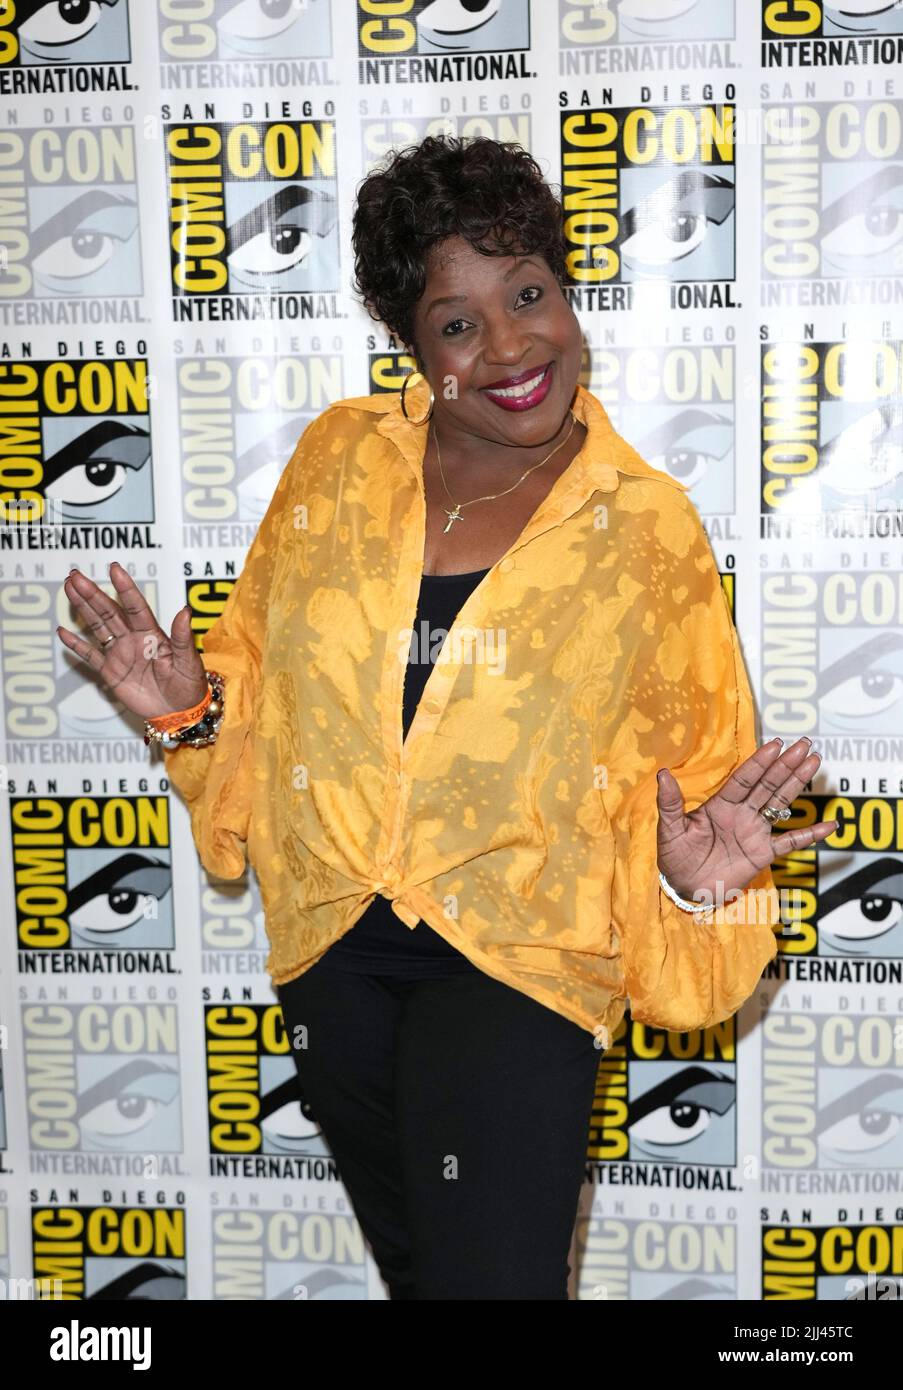 San Diego, USA. 22nd July, 2022. Jo Marie Payton at The Proud Family Panel during Comic-Con International: San Diego 2022 at the San Diego Convention Center in San Diego, California on July 22, 2022. Credit: Tony Forte/Media Punch/Alamy Live News Stock Photo